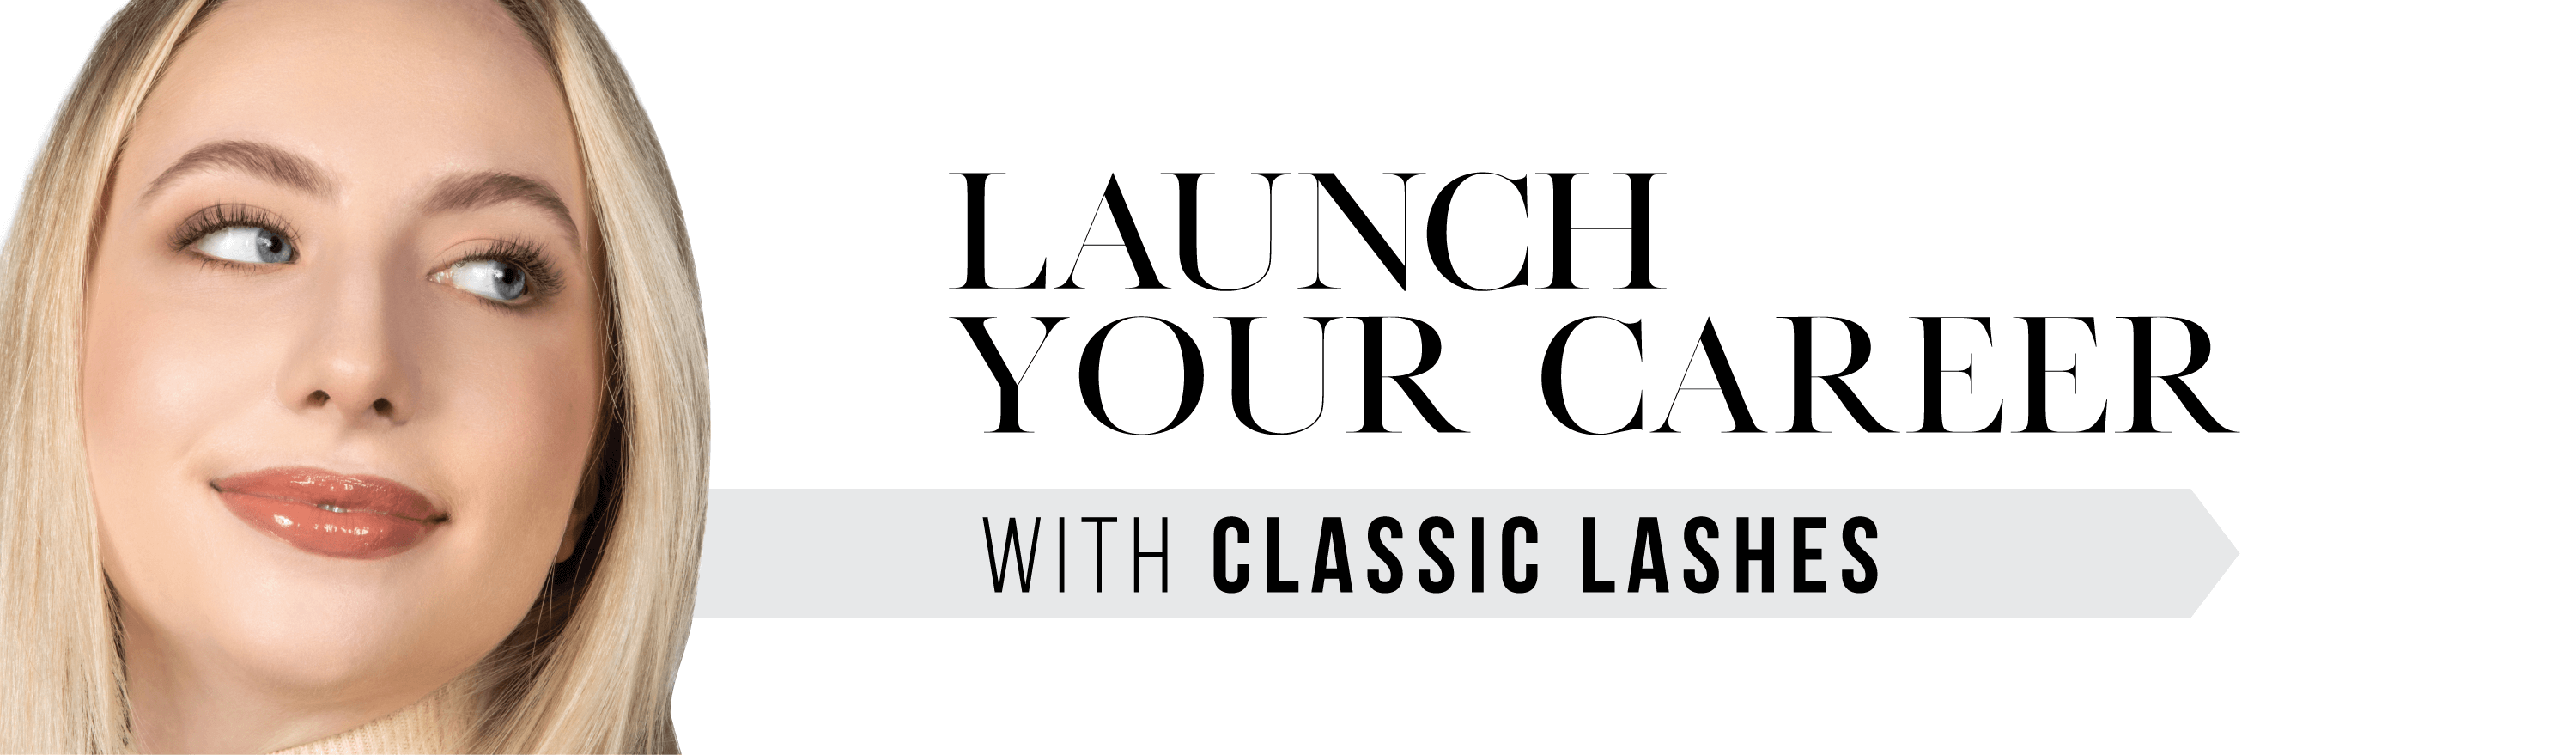 Girl with classic lash extensions. Launch your career with classic.